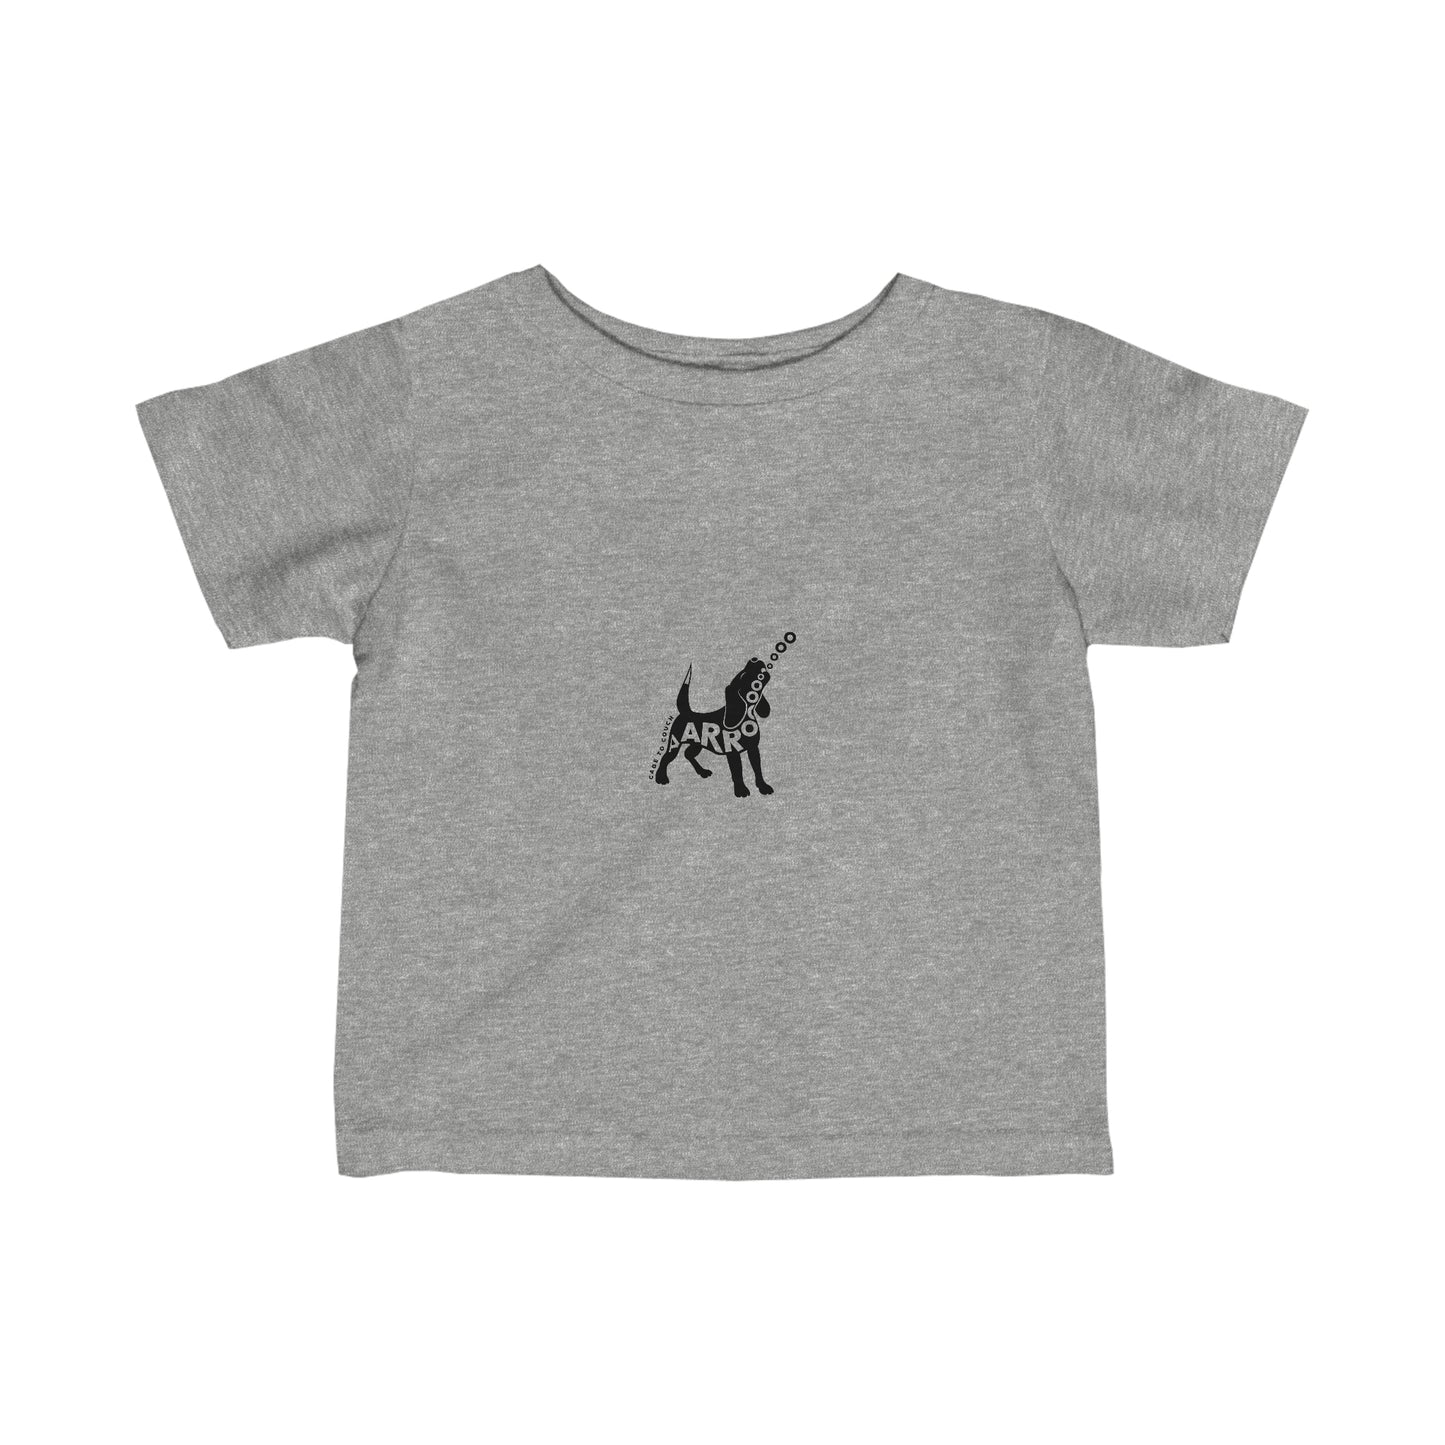 Arooo- If you know, you know! Infant Fine Jersey Tee